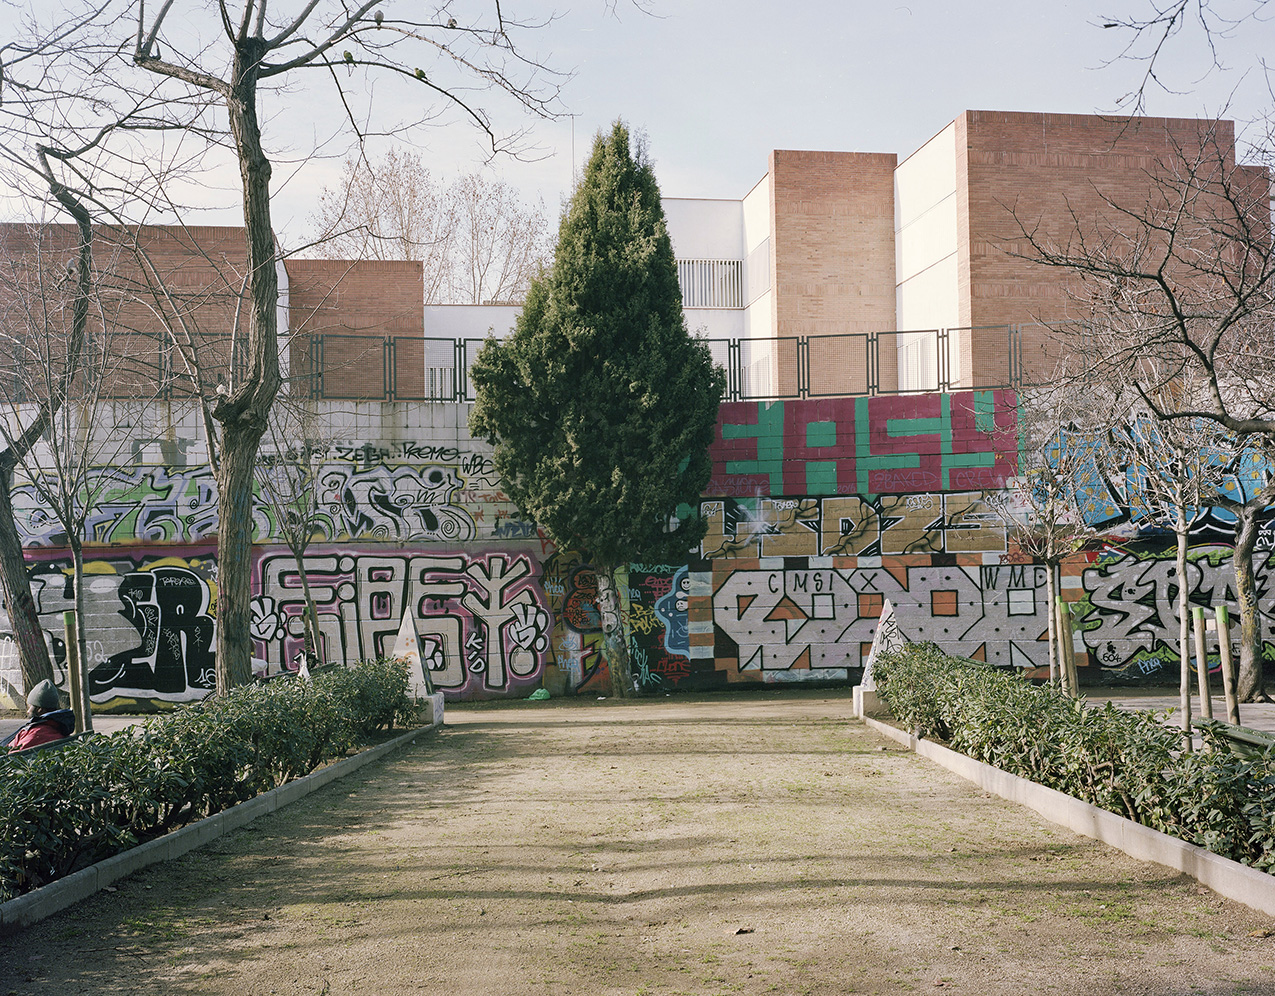 symmetrical walkway leading to a wall covered with graffiti, the most prominent word is "EASY"